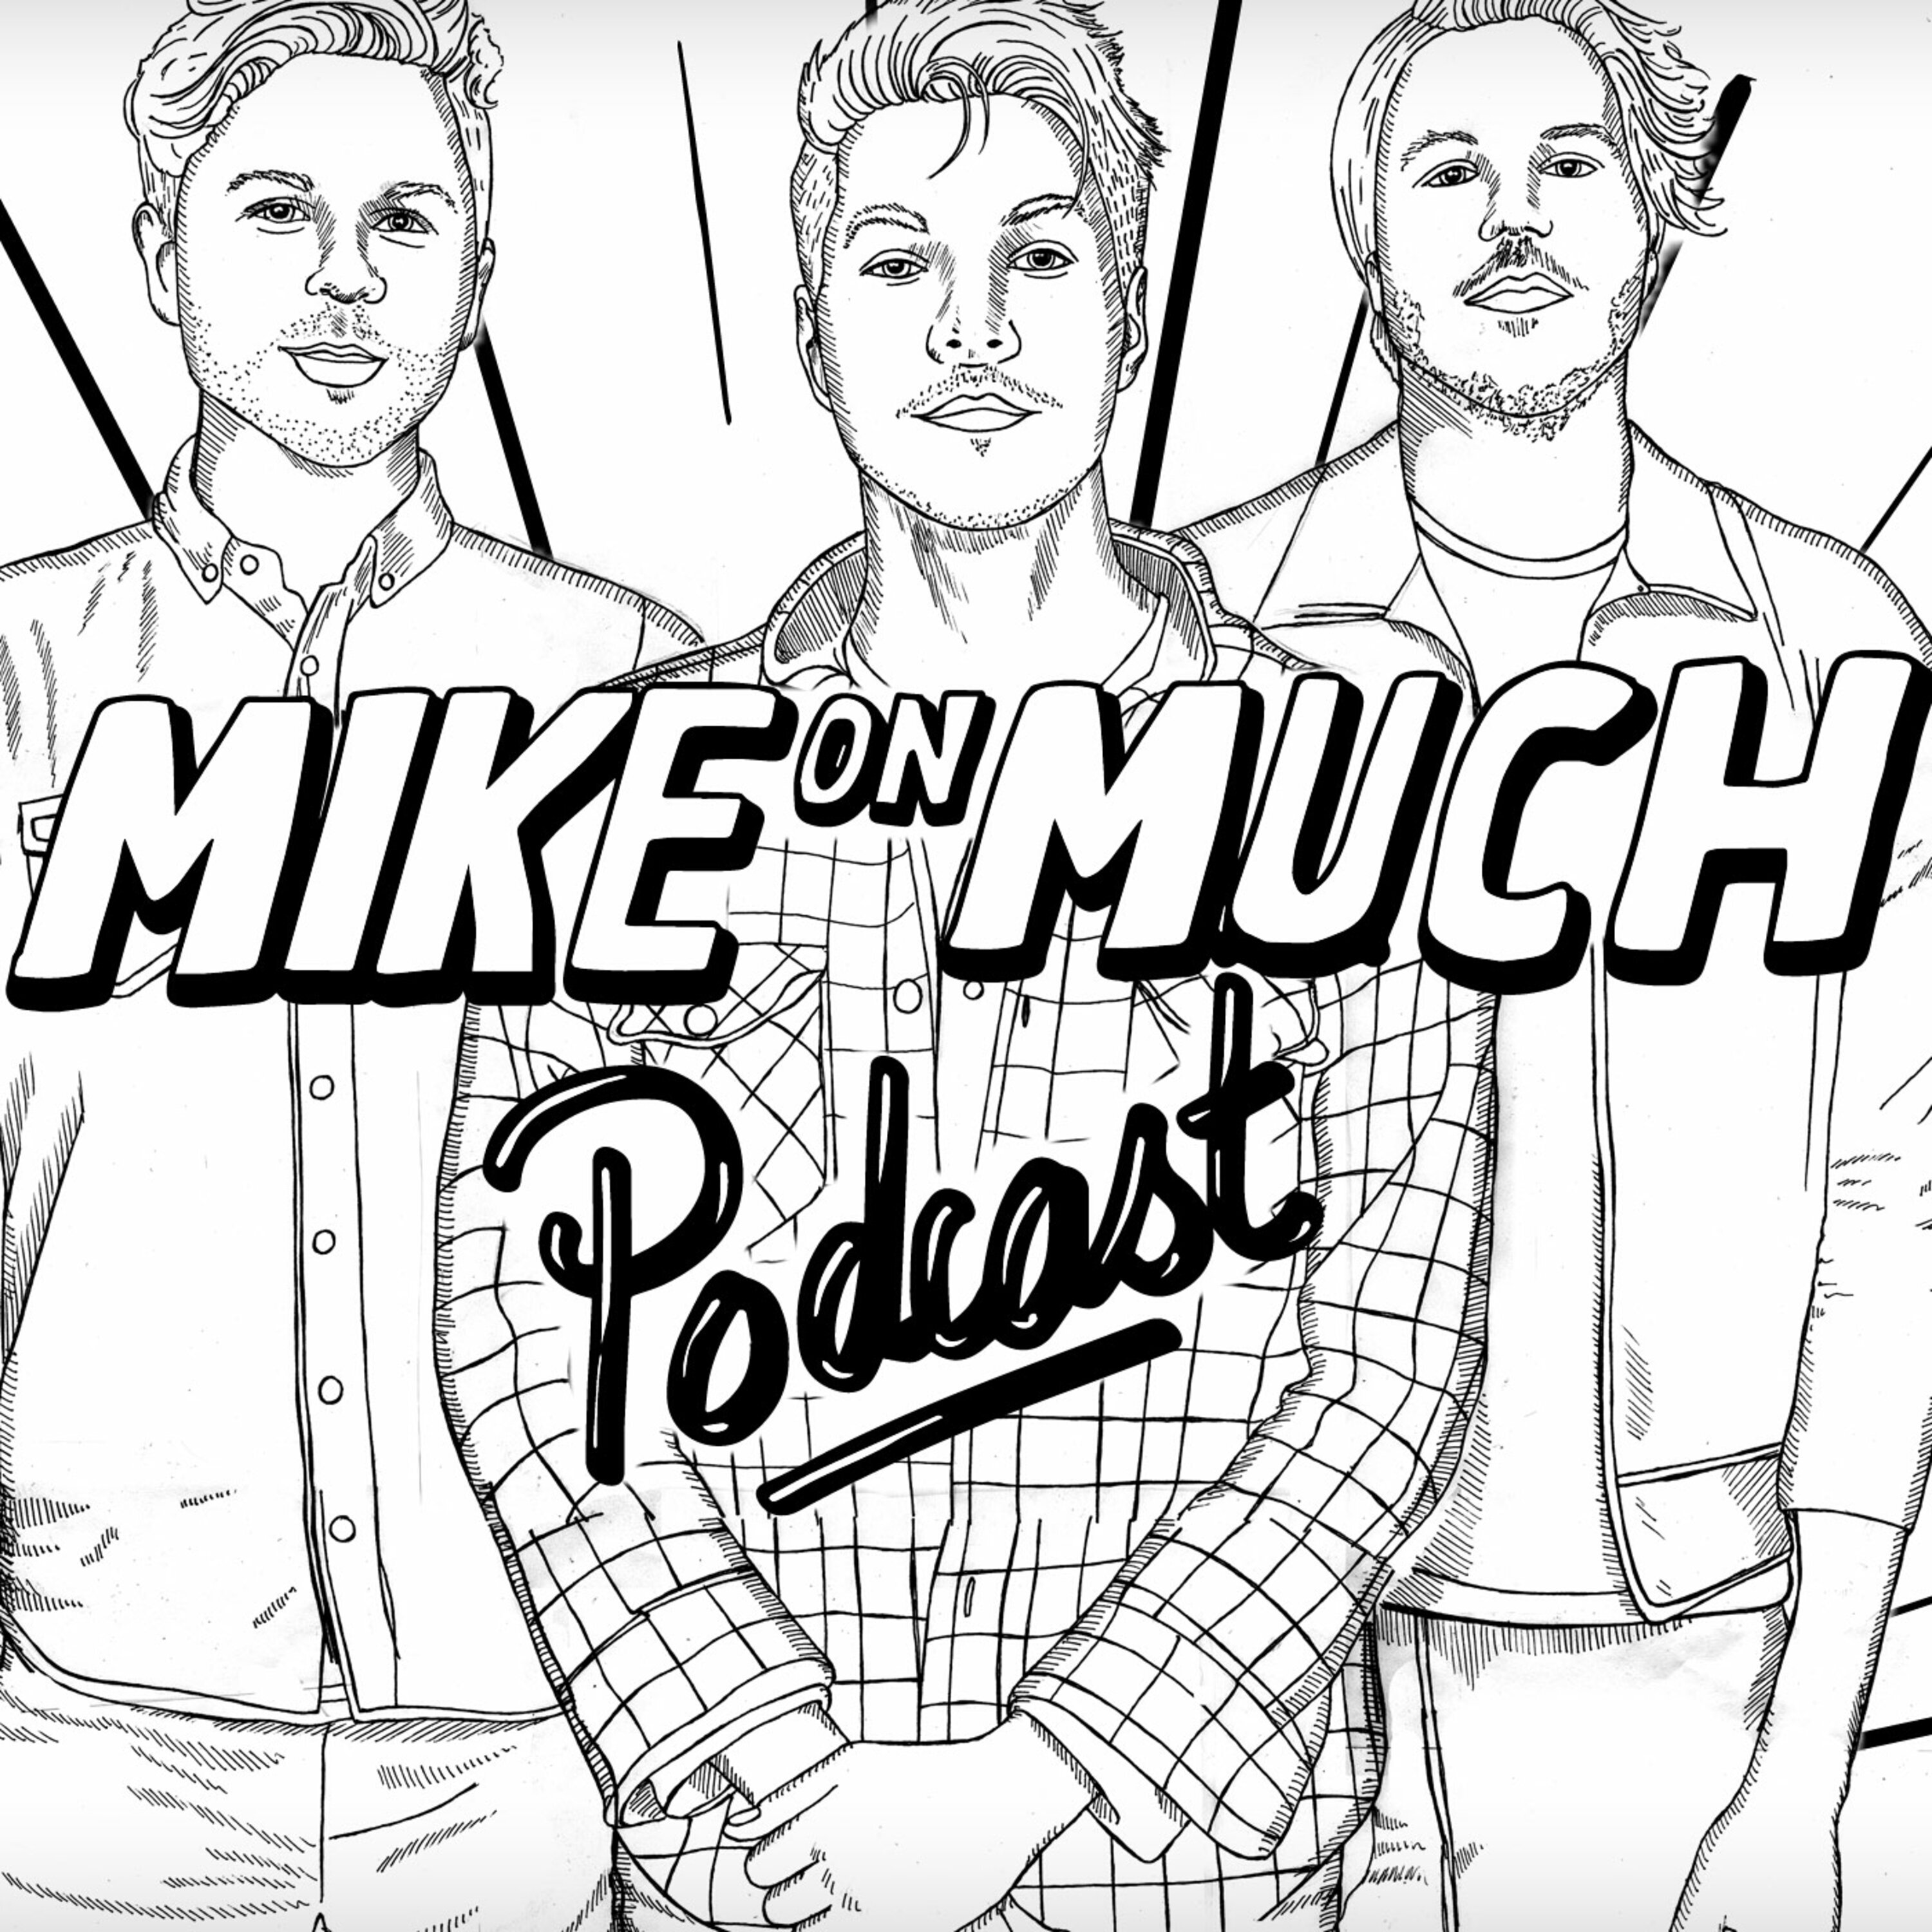 Season 1 Mike On Much: “His Pillow Talk Was Supreme”